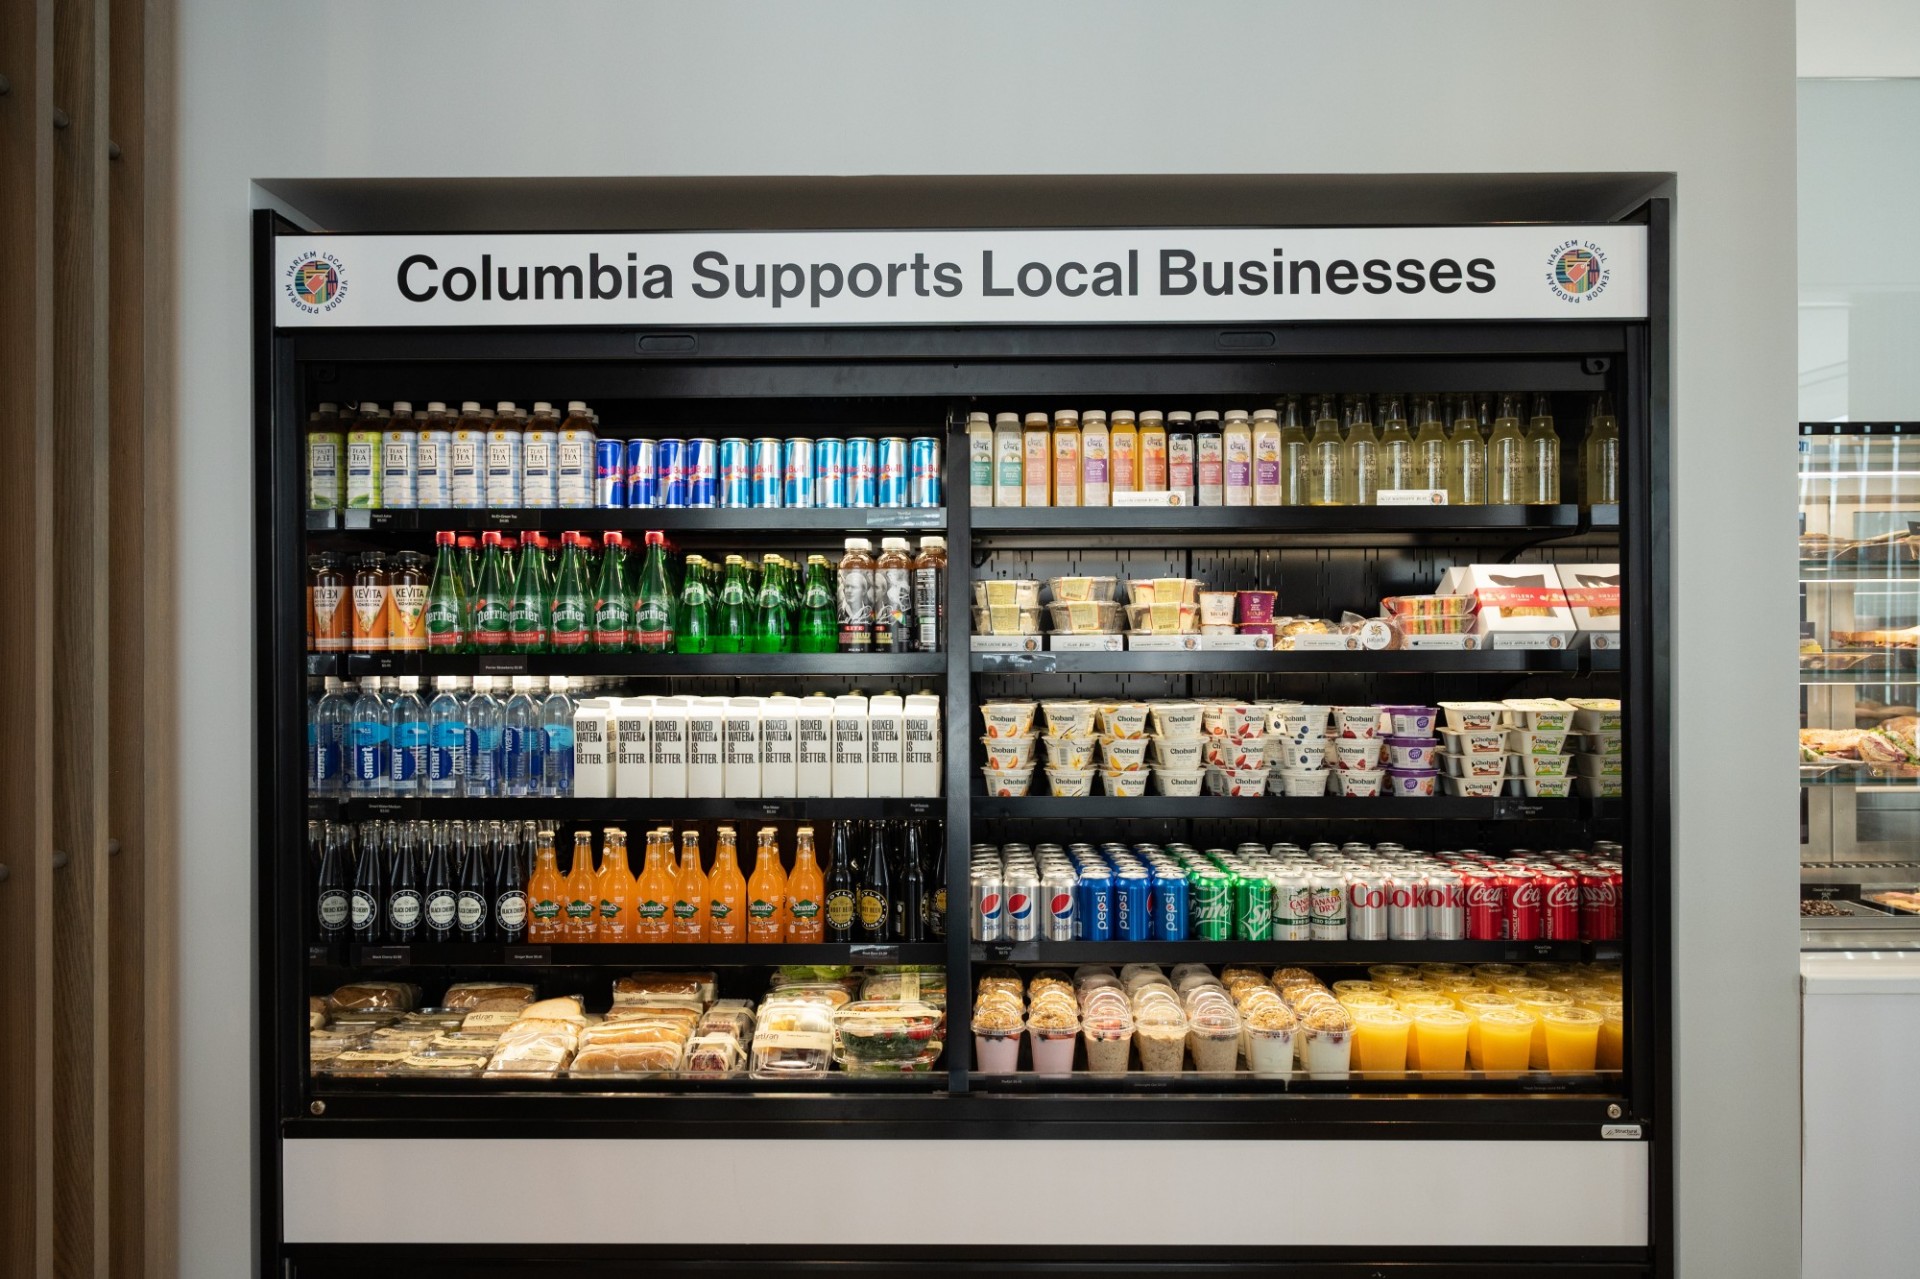 Products from local vendors on display in the café on the ground floor of David Geffen Hall. Photo by Diane Bondareff.